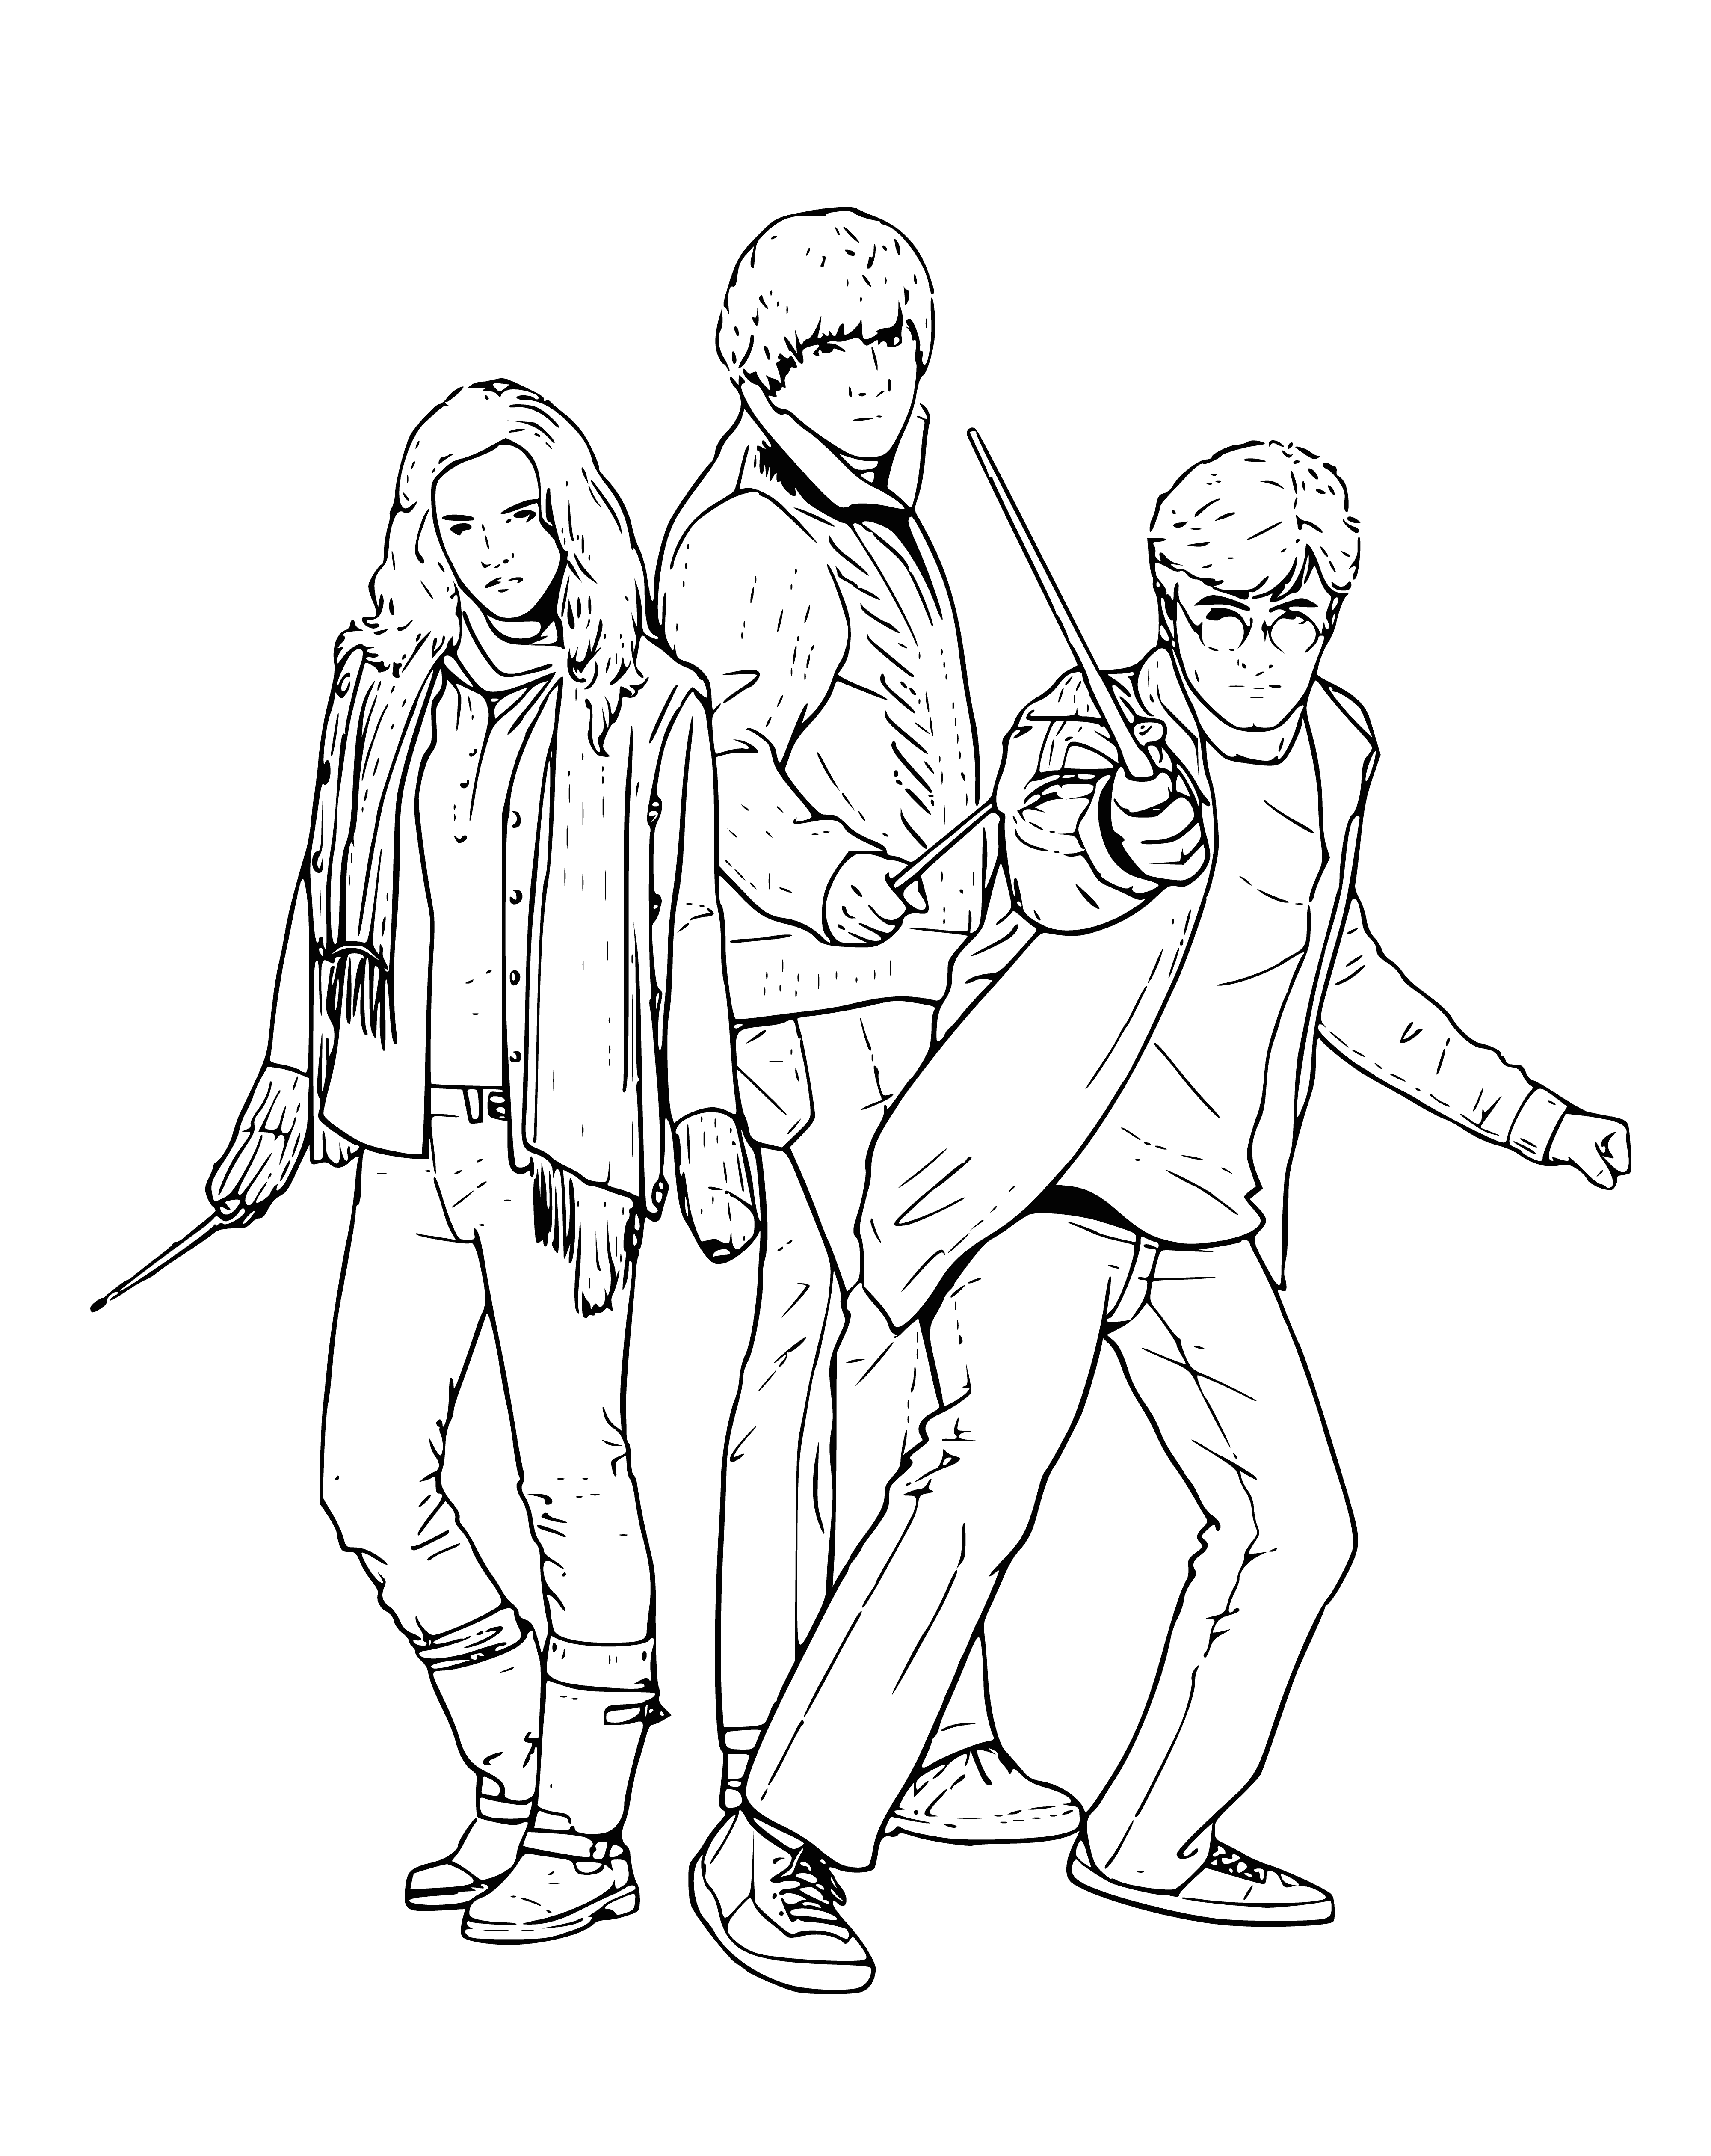 coloring page: Three students fighting unseen enemies, wands raised and determination in their eyes.